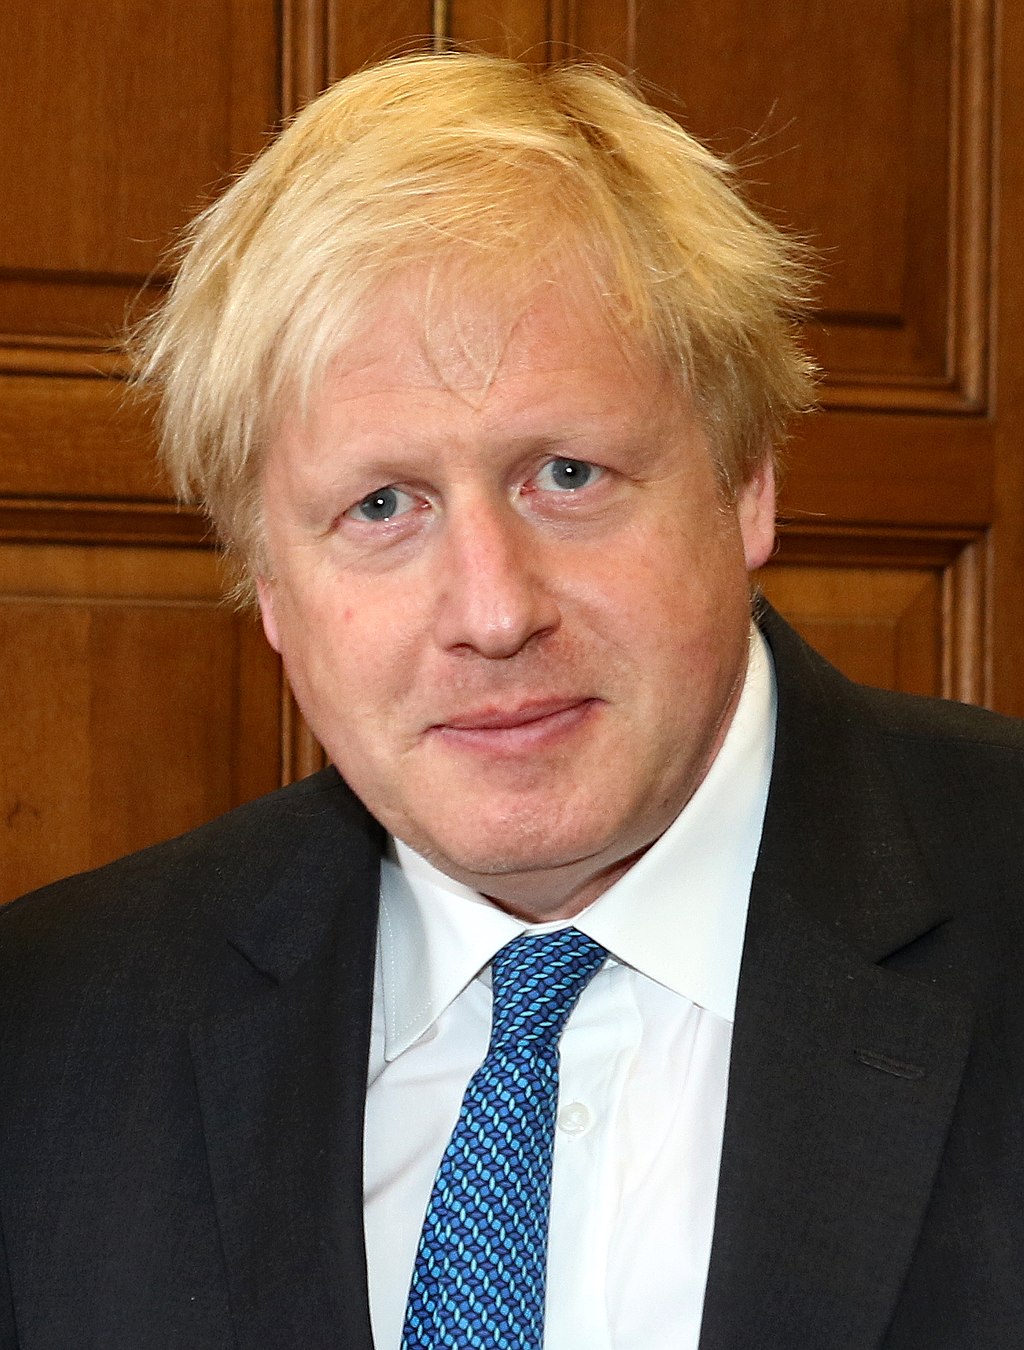 AP: 'Boris Johnson takes strong lead in race for next UK leader;' EU has concerns